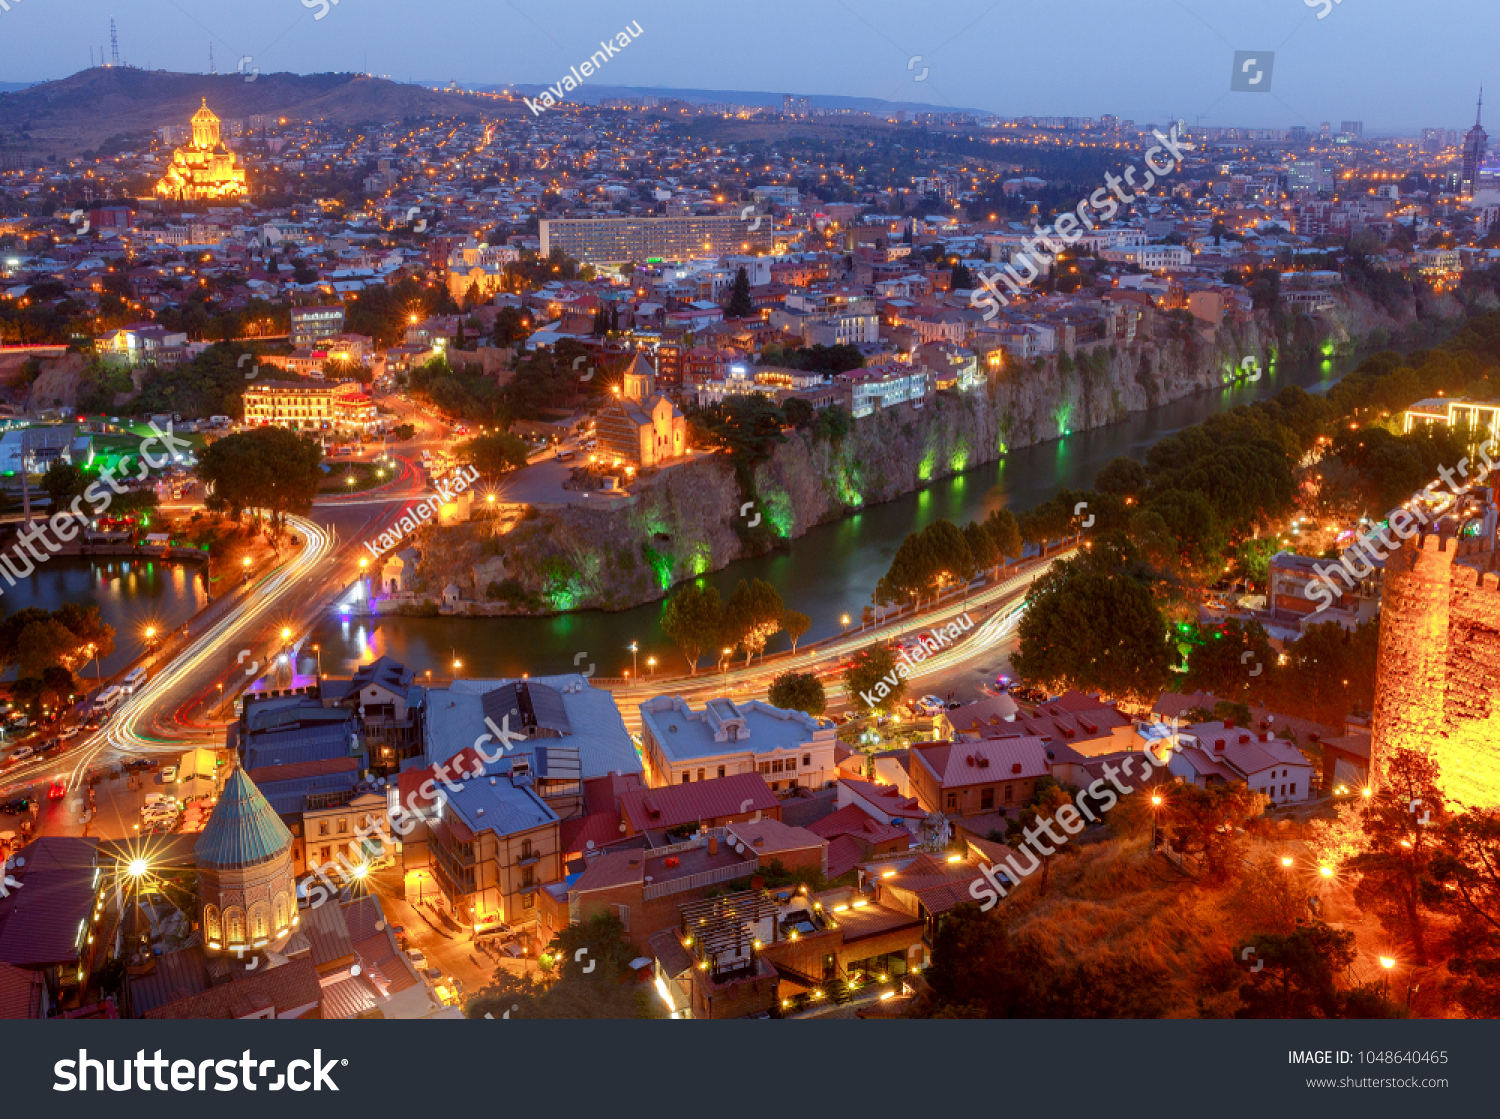 Tbilisi. View of the city at night. #1048640465